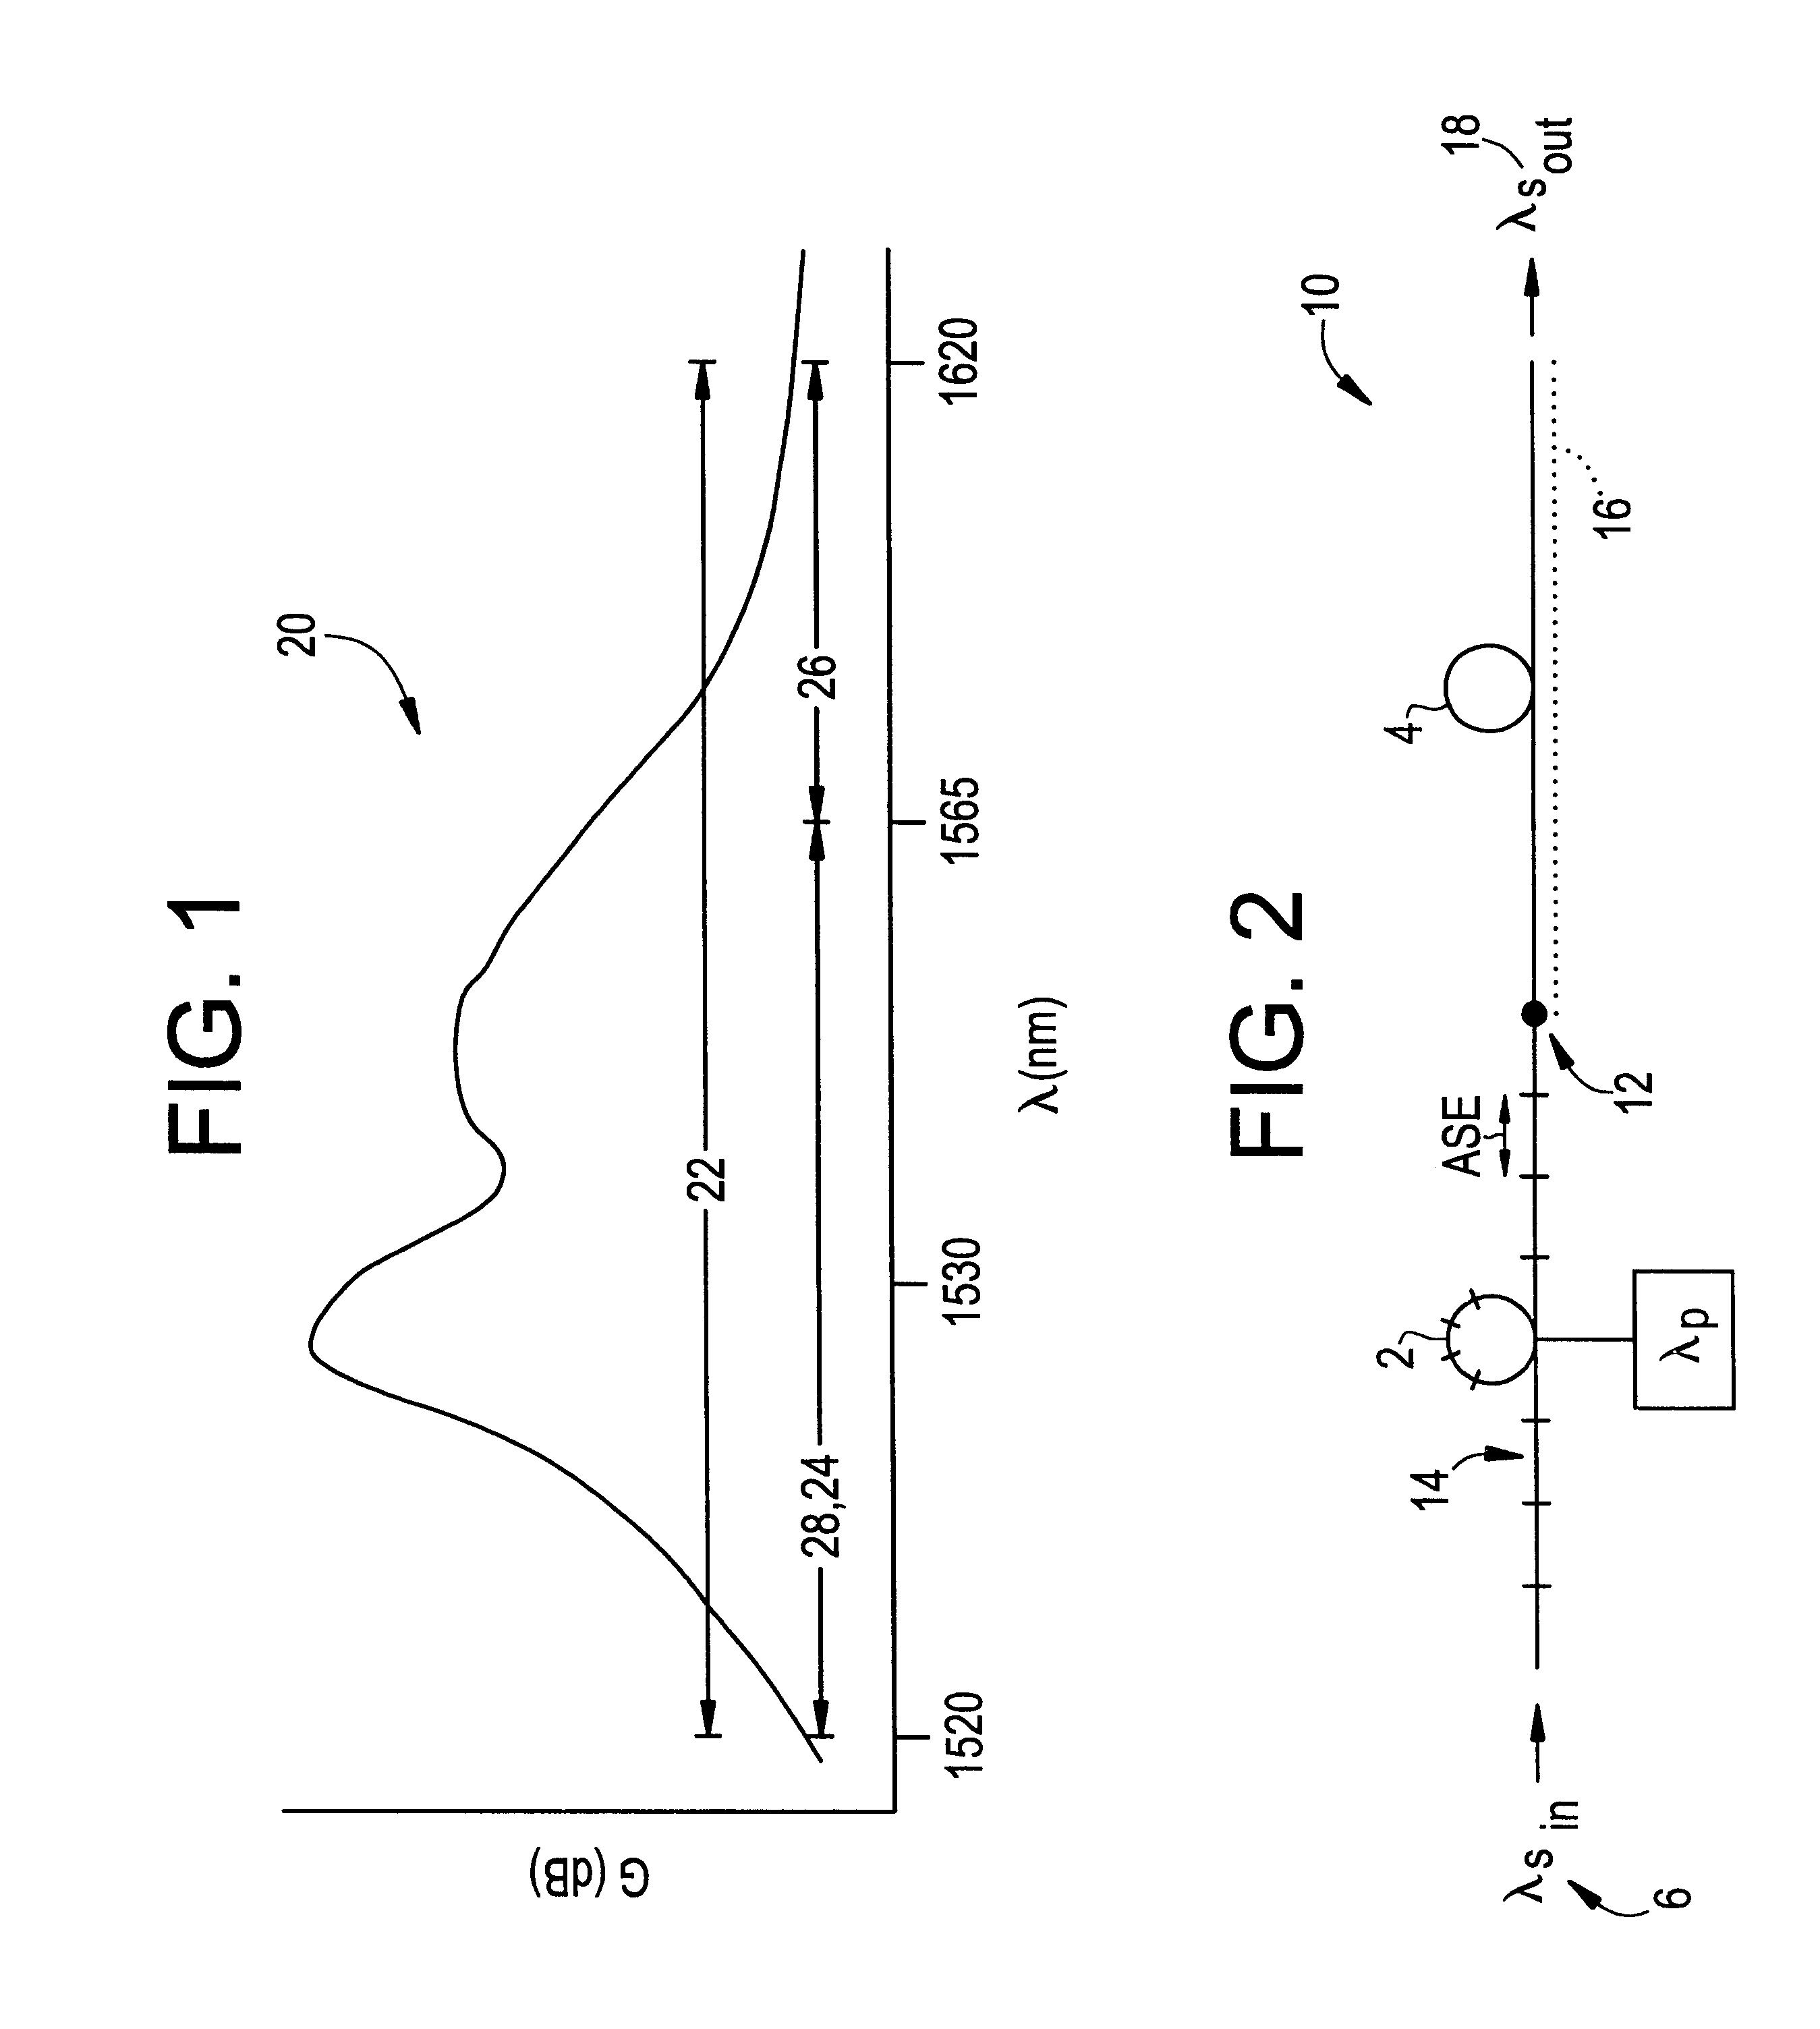 L band amplifier with distributed filtering